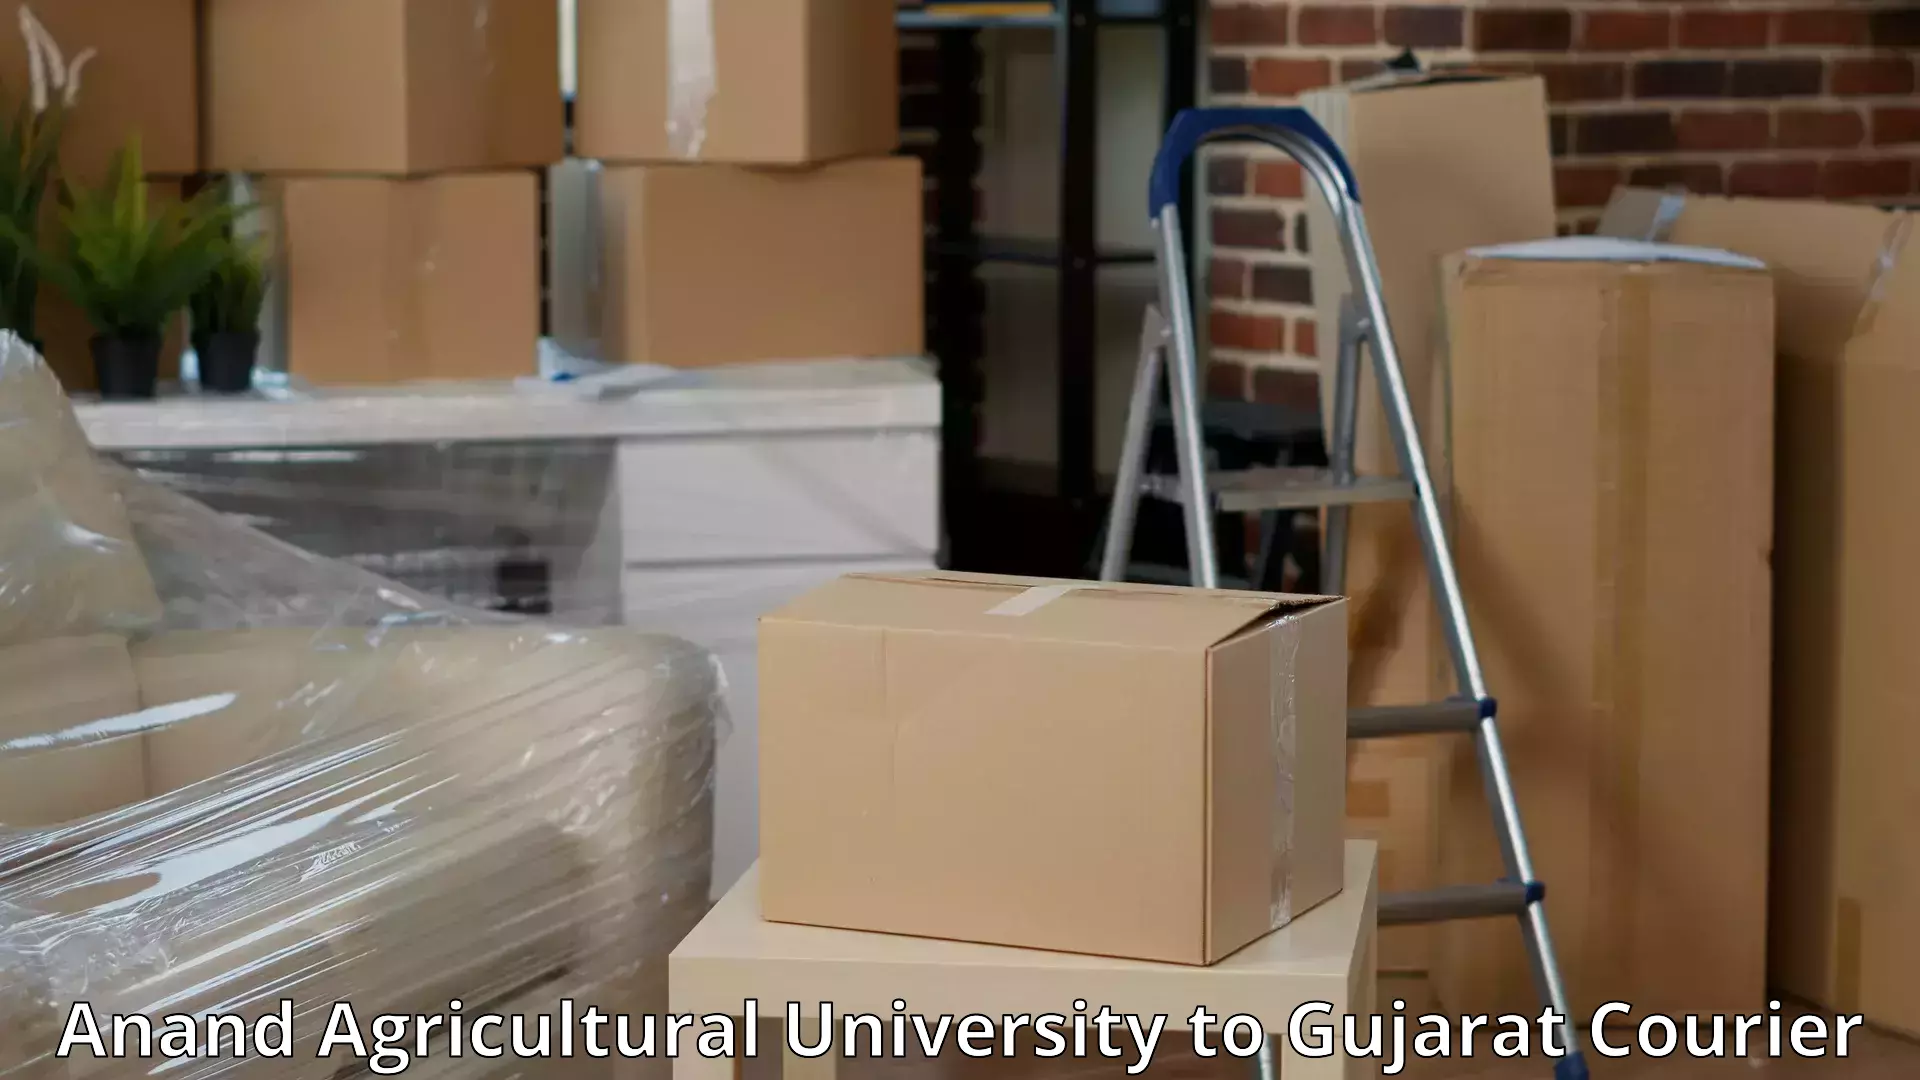 Efficient packing and moving Anand Agricultural University to Prantij